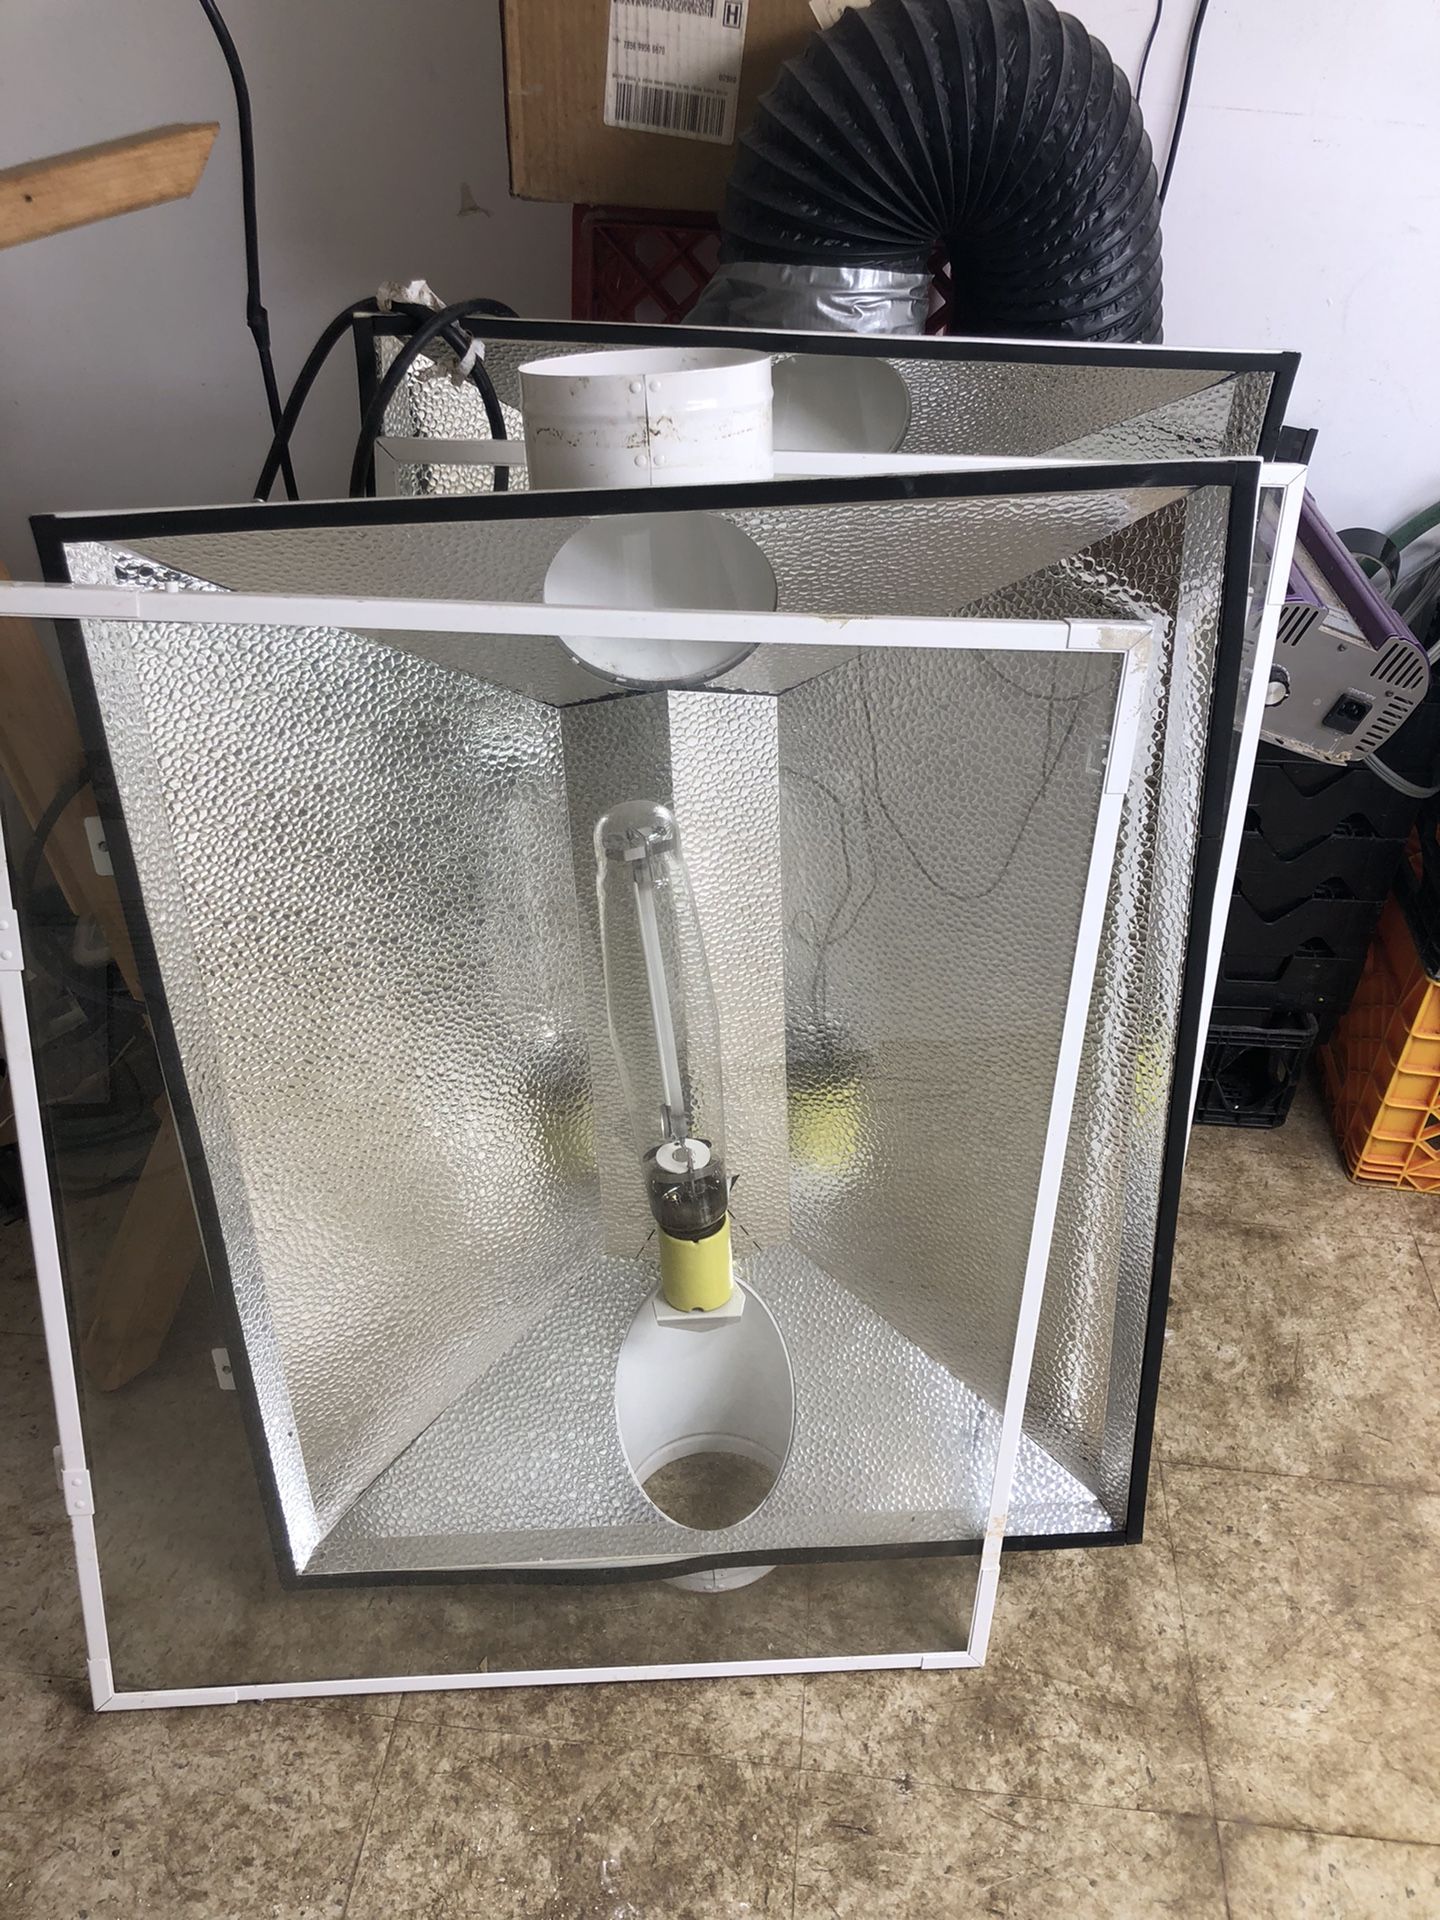 Professional Grow Equipment For Sale Cheap Grow Monster Bud With This